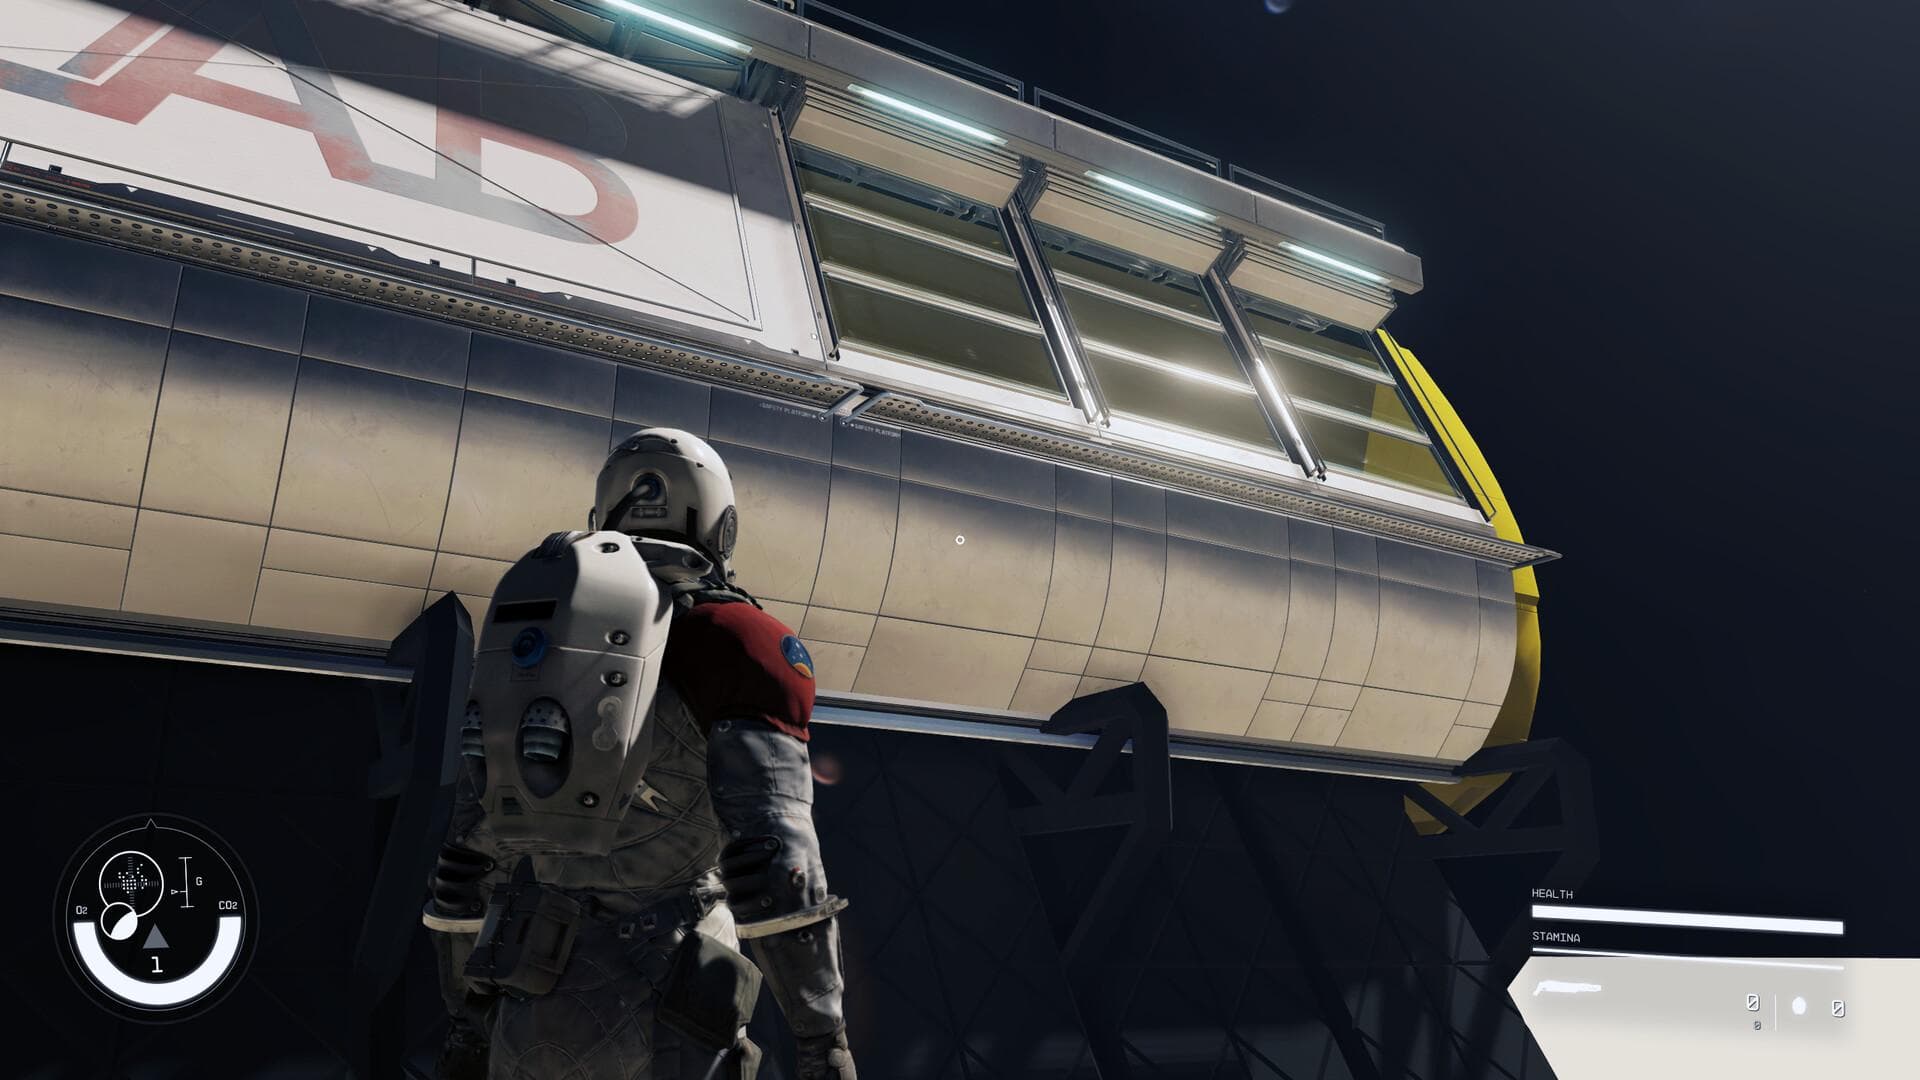 Supposed Starfield leaked image shows an astronaunt looking at space ship